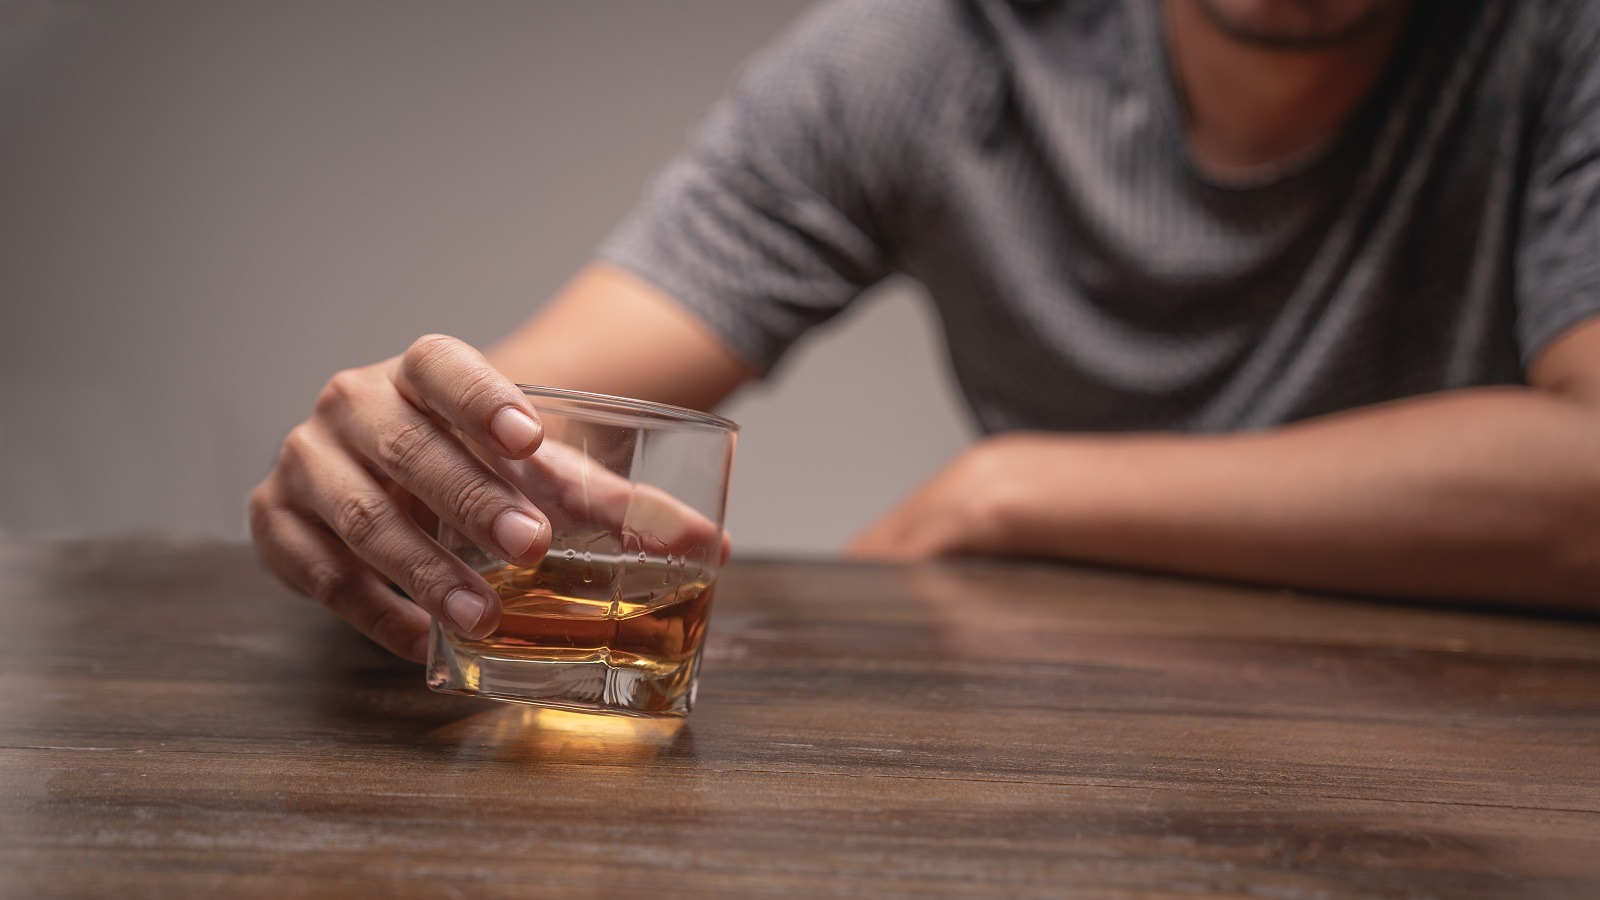 What does alcohol do to your body?